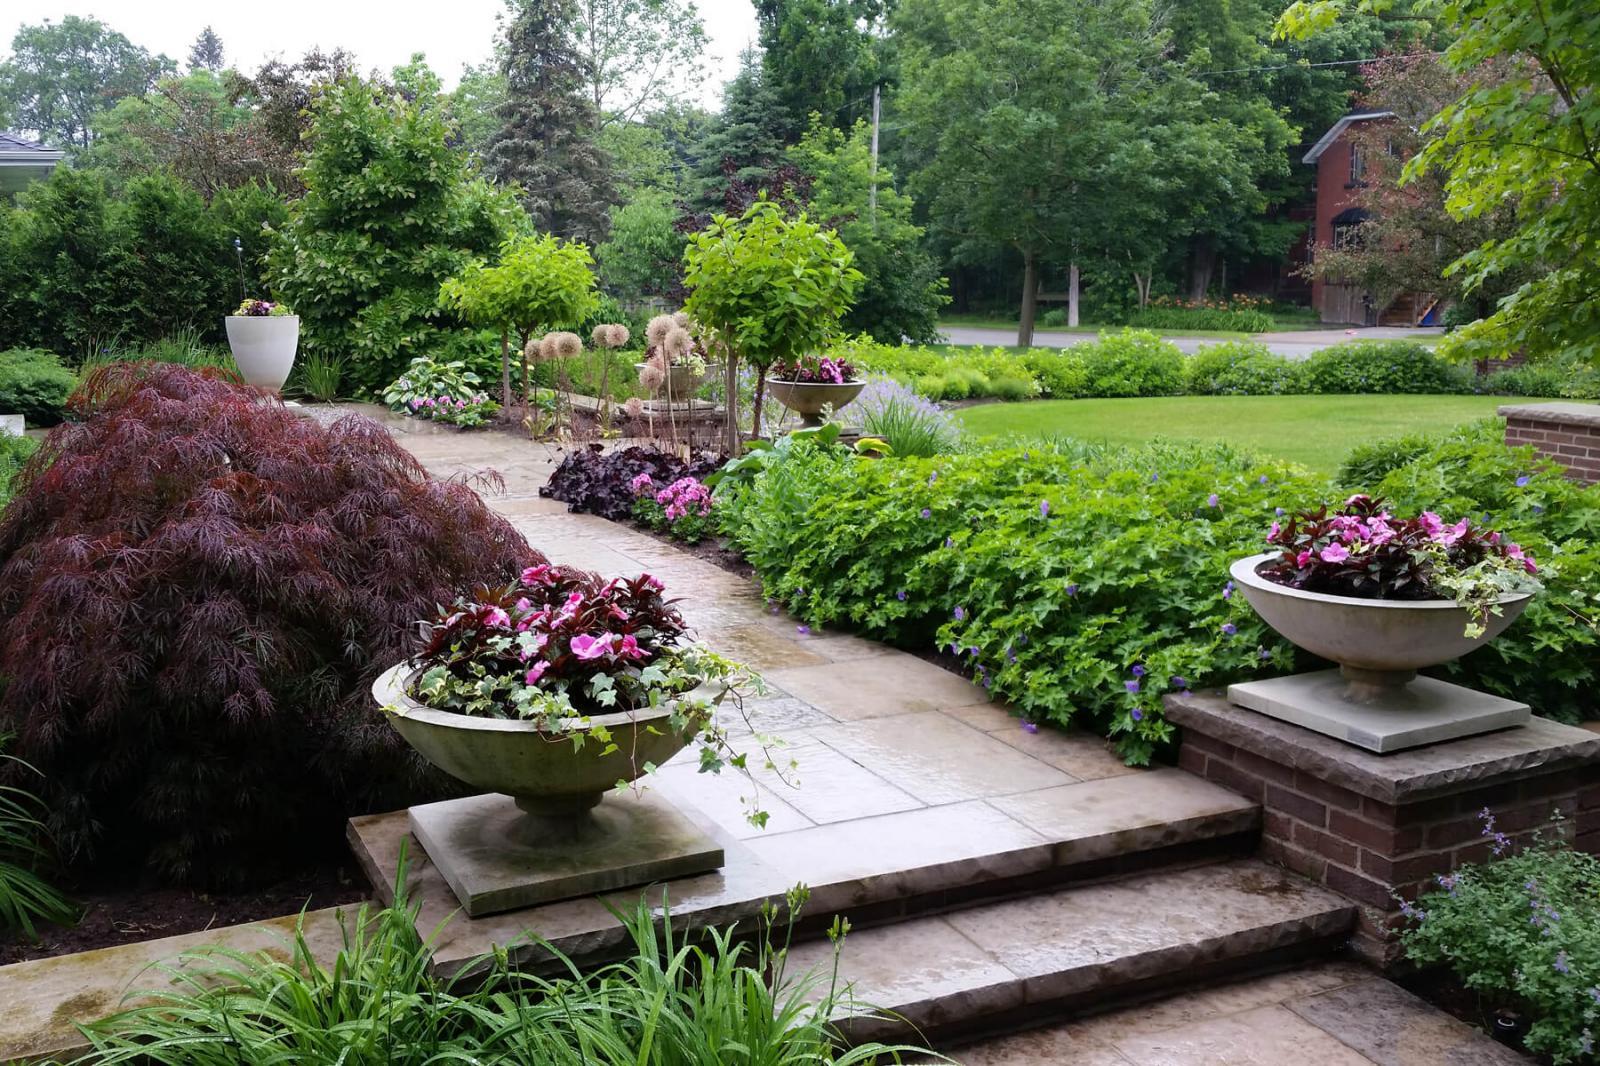 46th Annual Awards Winners Landscape, Gardening And Landscaping Services Award